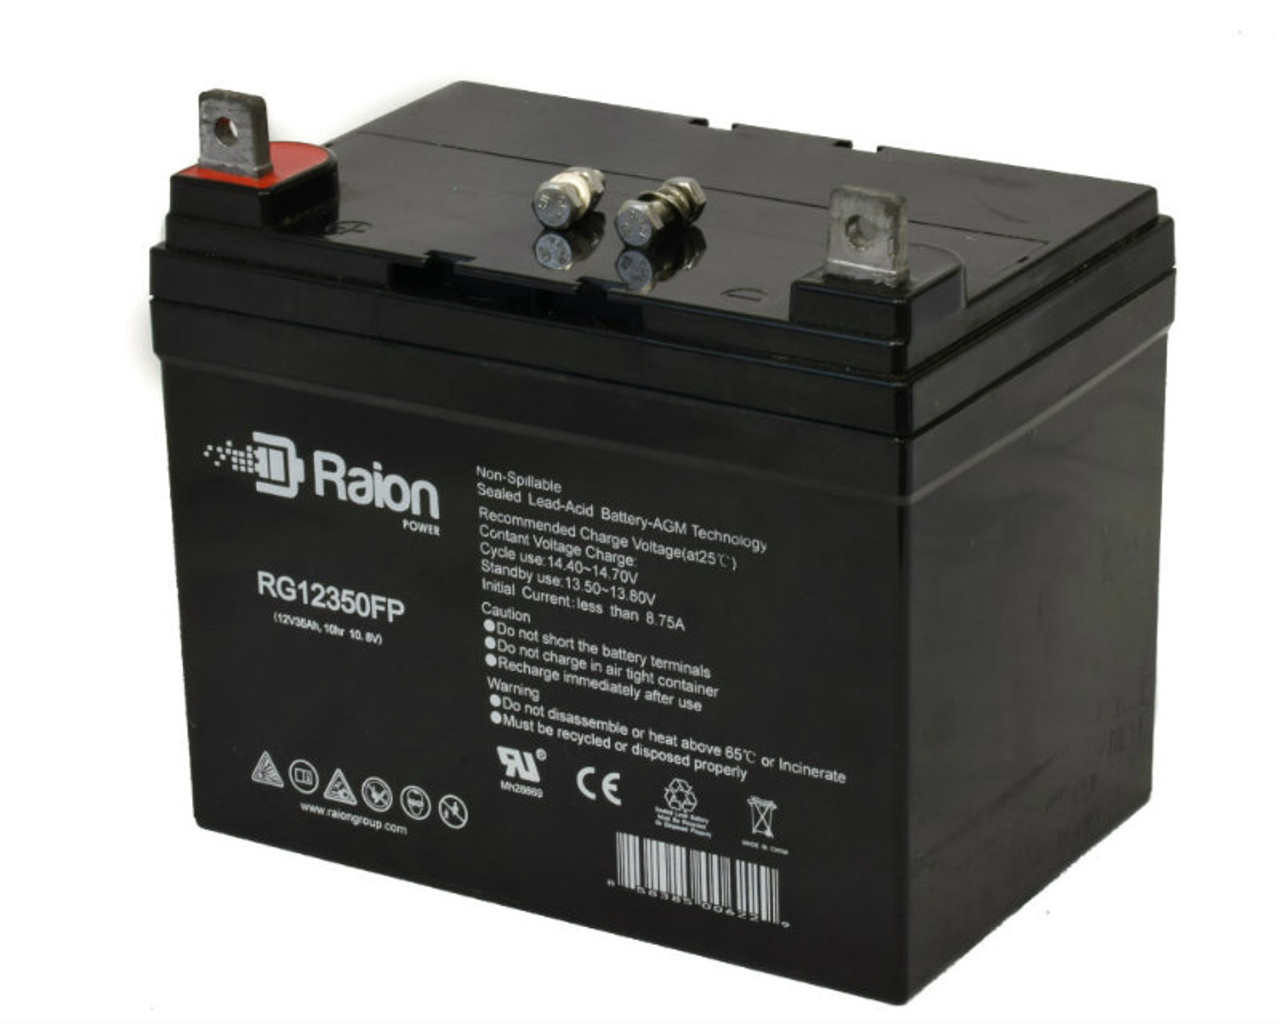 Raion Power Replacement 12V 35Ah RG12350FP Battery for Agco Allis 1616H